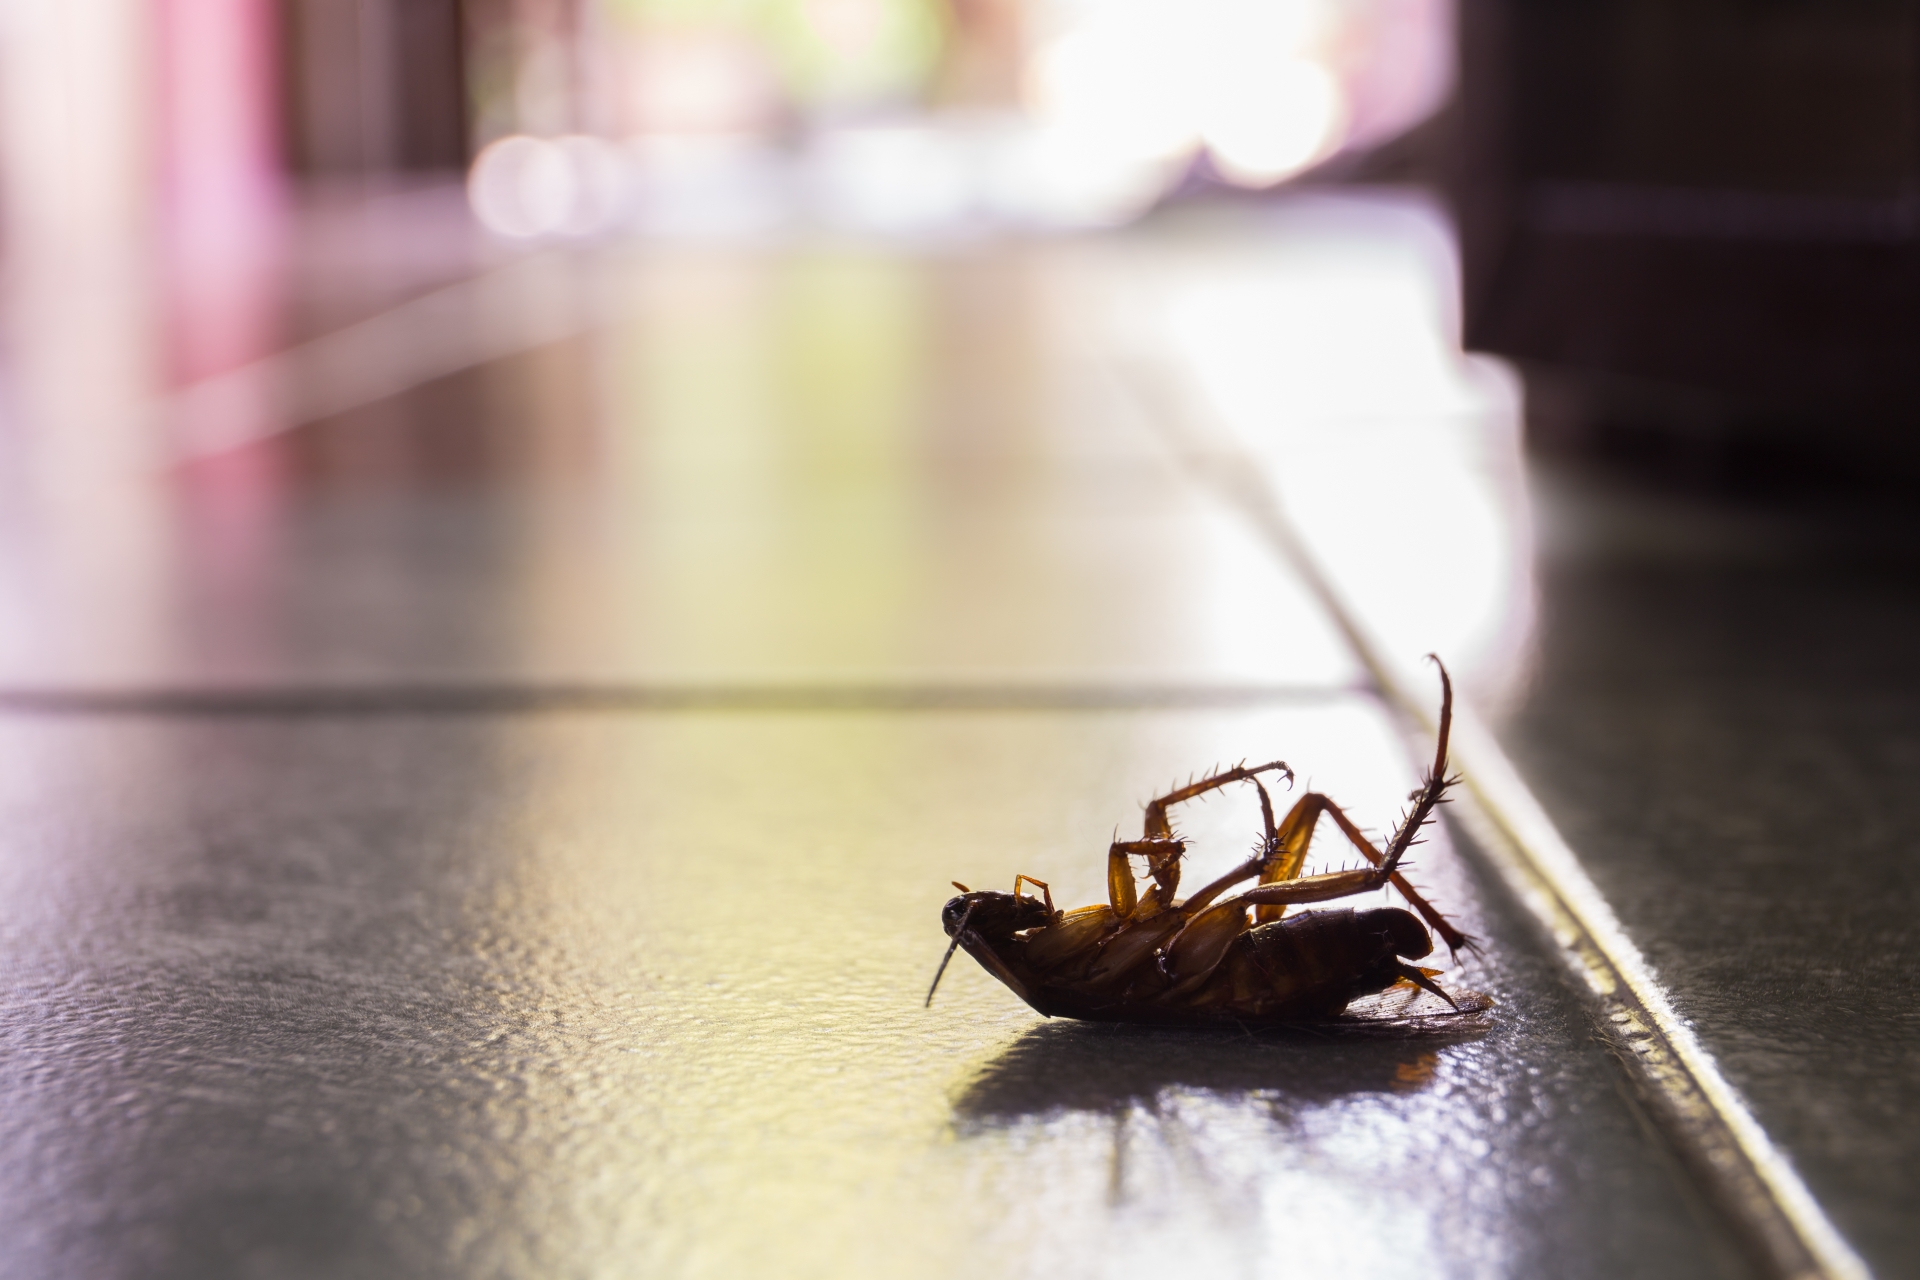 Cockroach Control, Pest Control in Herne Hill, SE24. Call Now 020 8166 9746